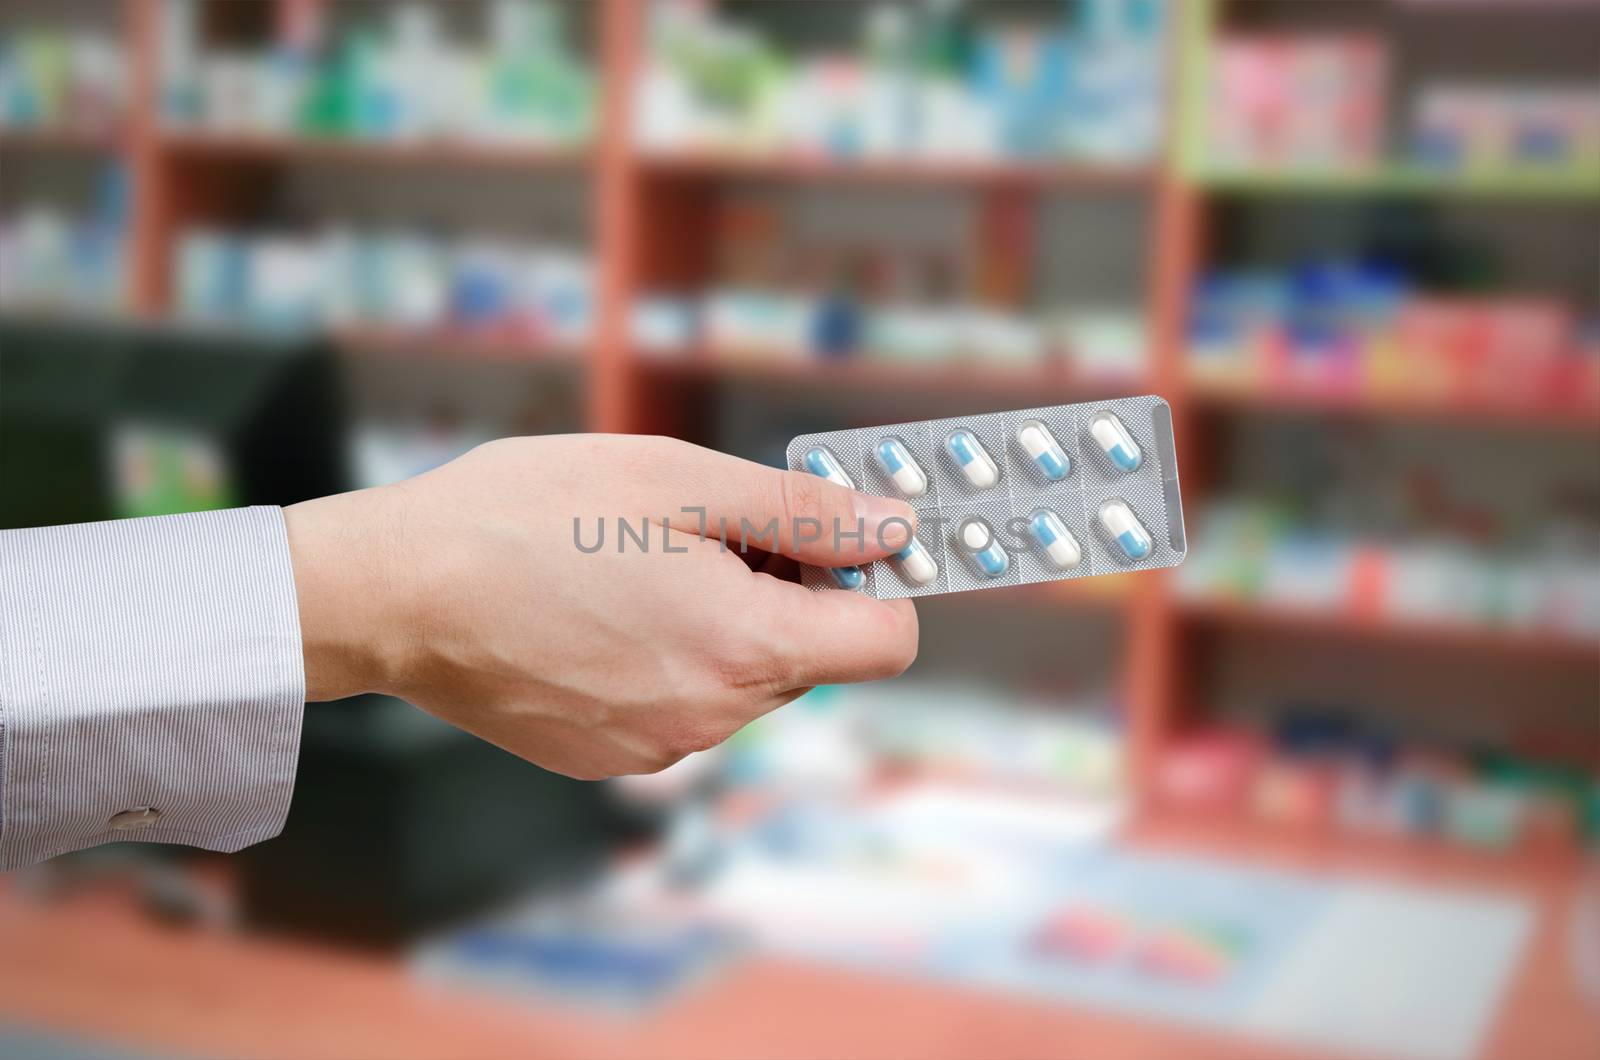 Pharmacist holding tablets in hands. pills medicine pharmacy hand holding drugs buy health concept